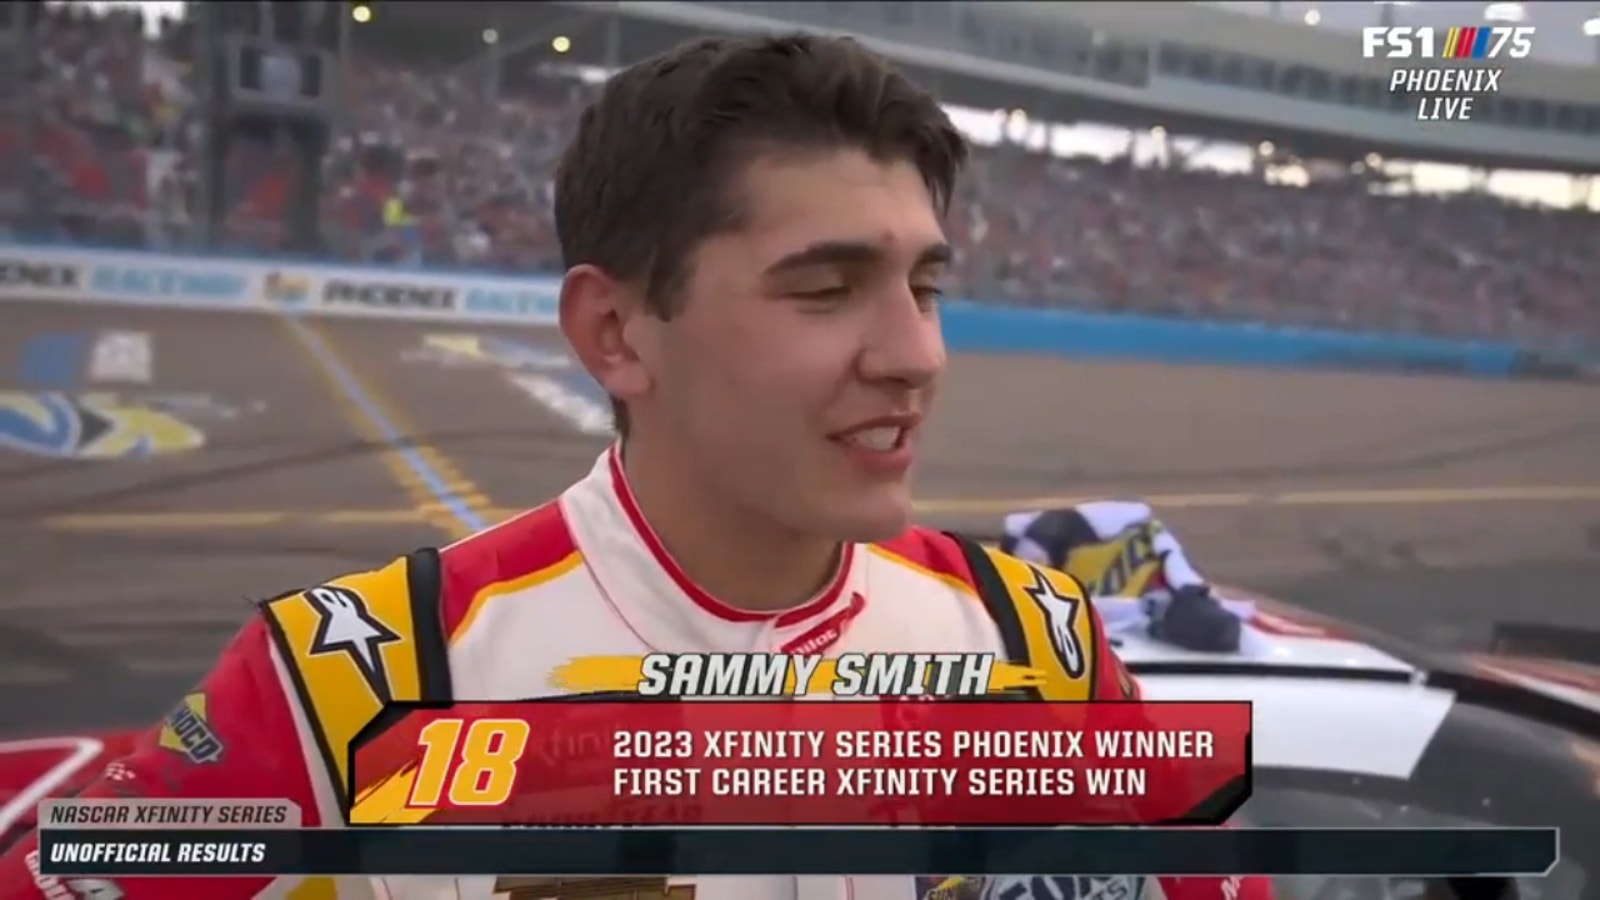 Sammy Smith reacts after his first career Xfinity Series victory